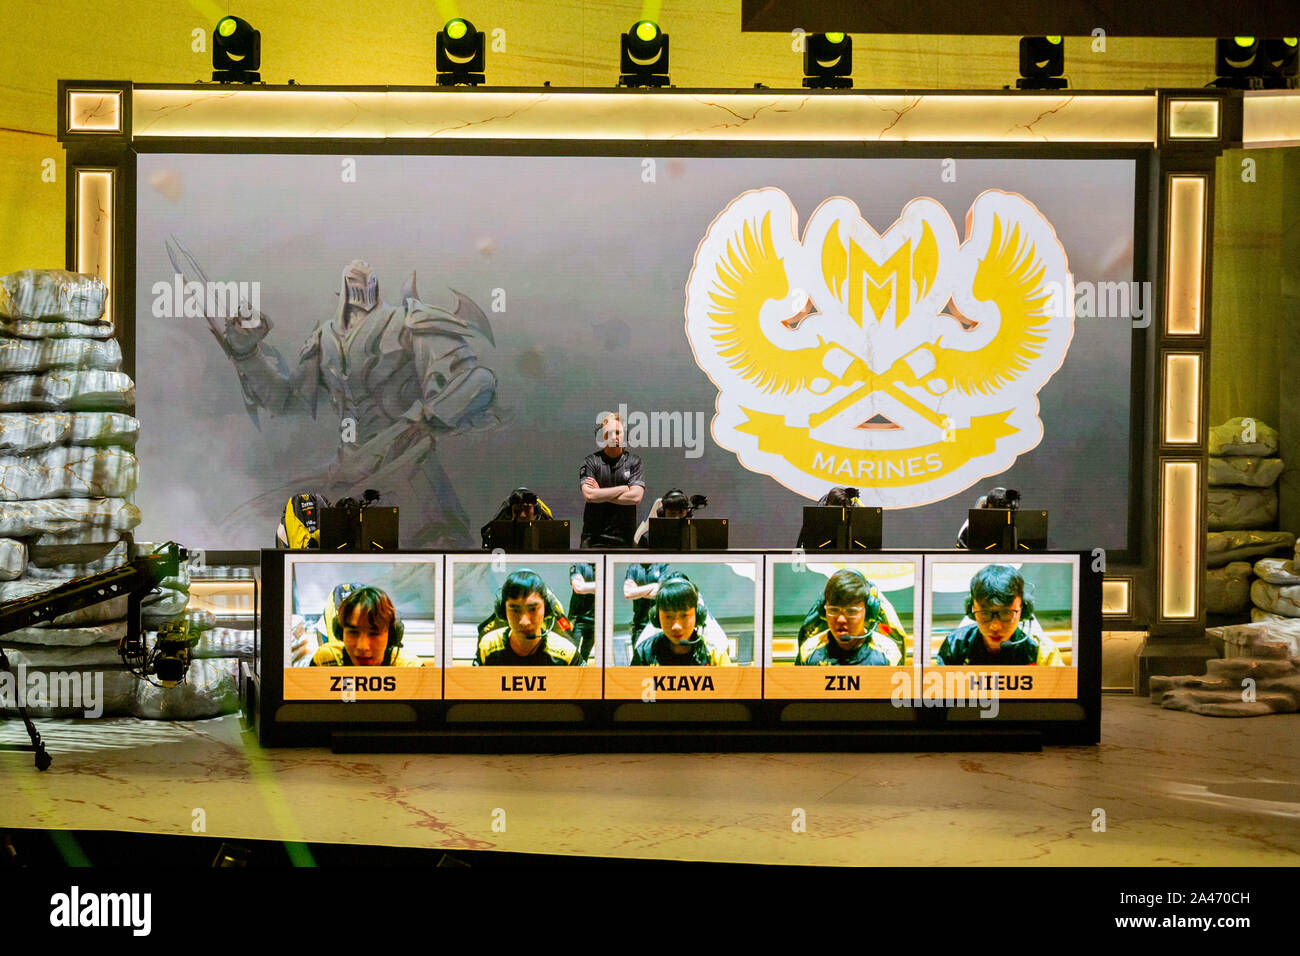 Berlin, Germany. 12th Oct, 2019. The E-Sport team Marines Esports (GIGABYTE Marines, GAM Esports) will compete in the group phase of the E-Sport 'League of Legends' World Championship at the Verti Music Hall. Credit: Christoph Soeder/dpa/Alamy Live News Stock Photo